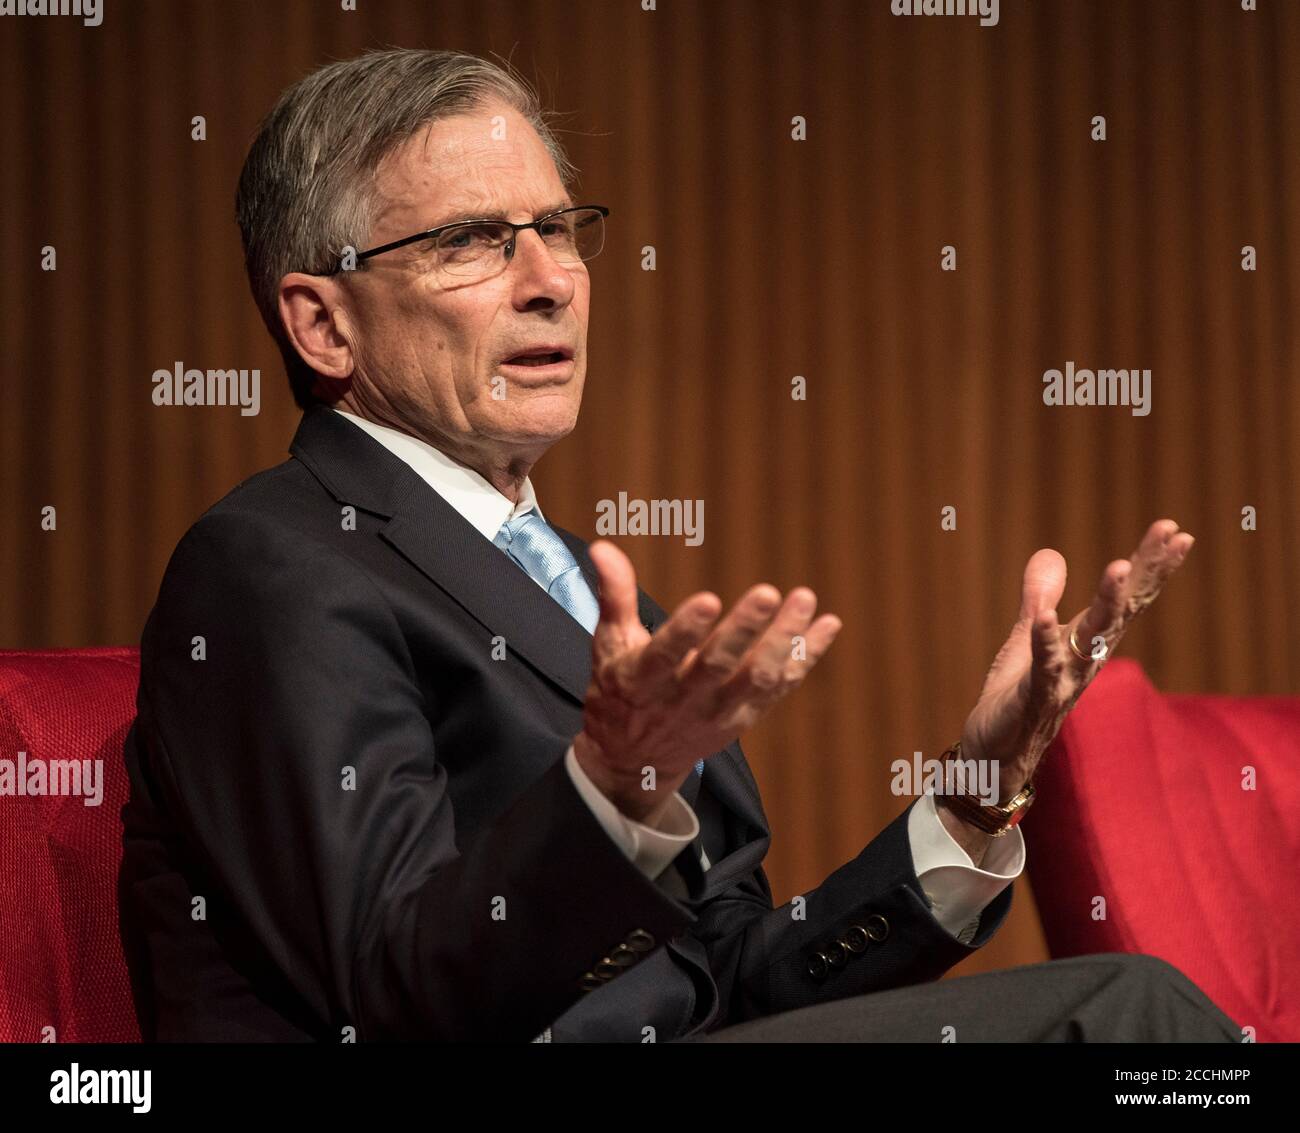 William Adams, chairman of the National Endowment for the Humanities and a Vietnam veteran, moderates a panel discussion about the Vietnam War at the LBJ Presidential Library April 28, 2016 in Austin, Texas. Stock Photo